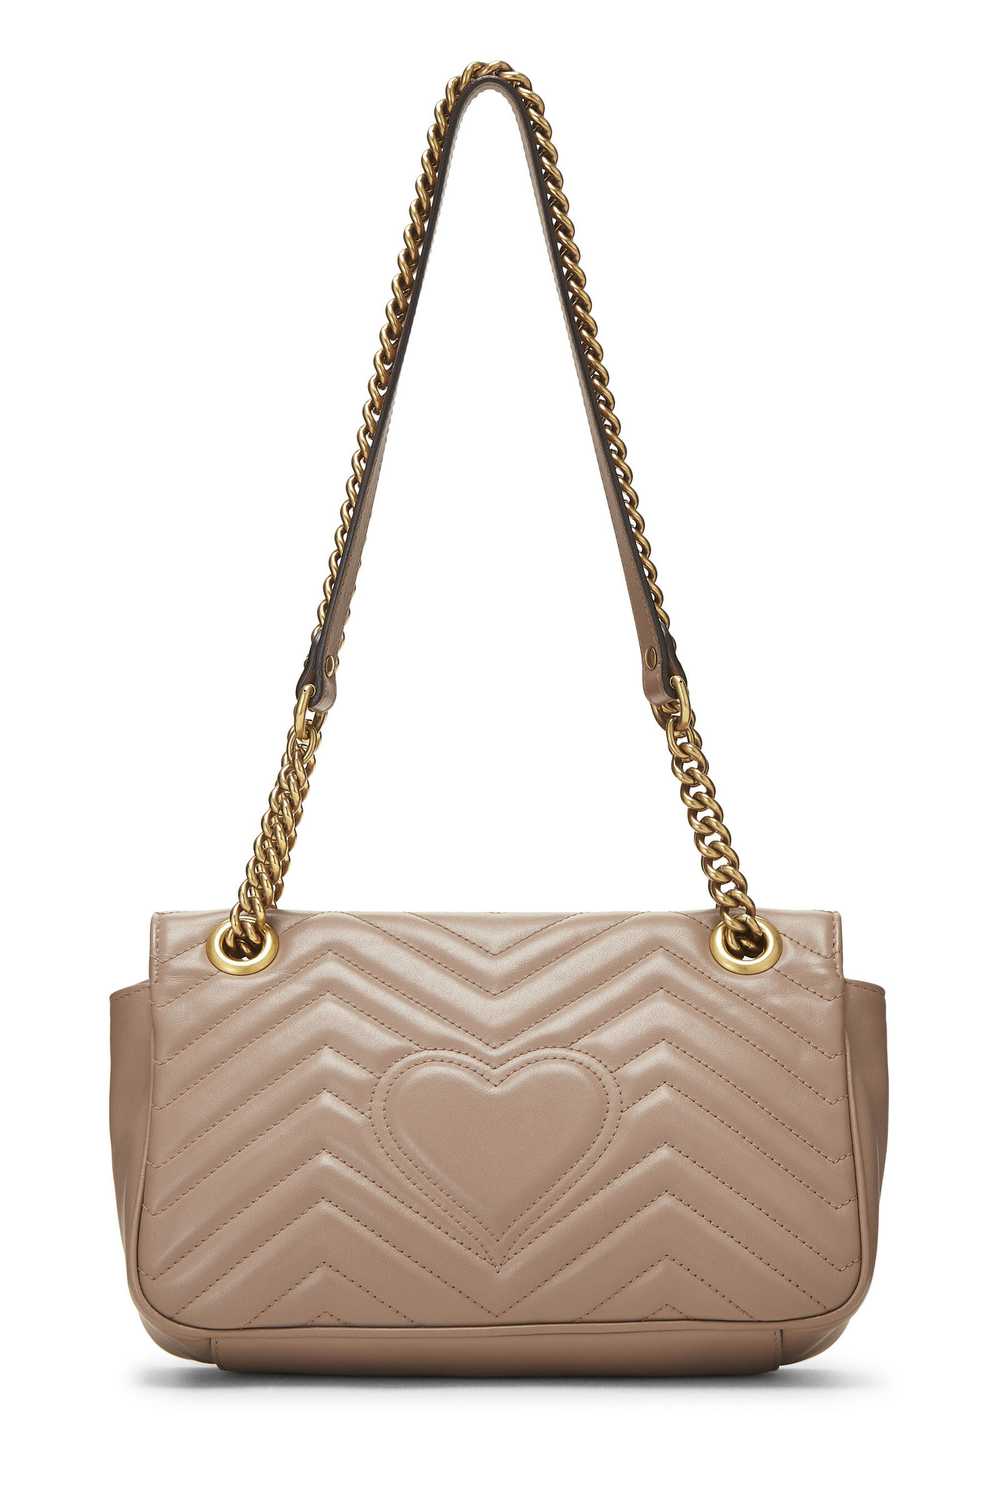 Pink Leather GG Marmont Shoulder Bag Small - image 4